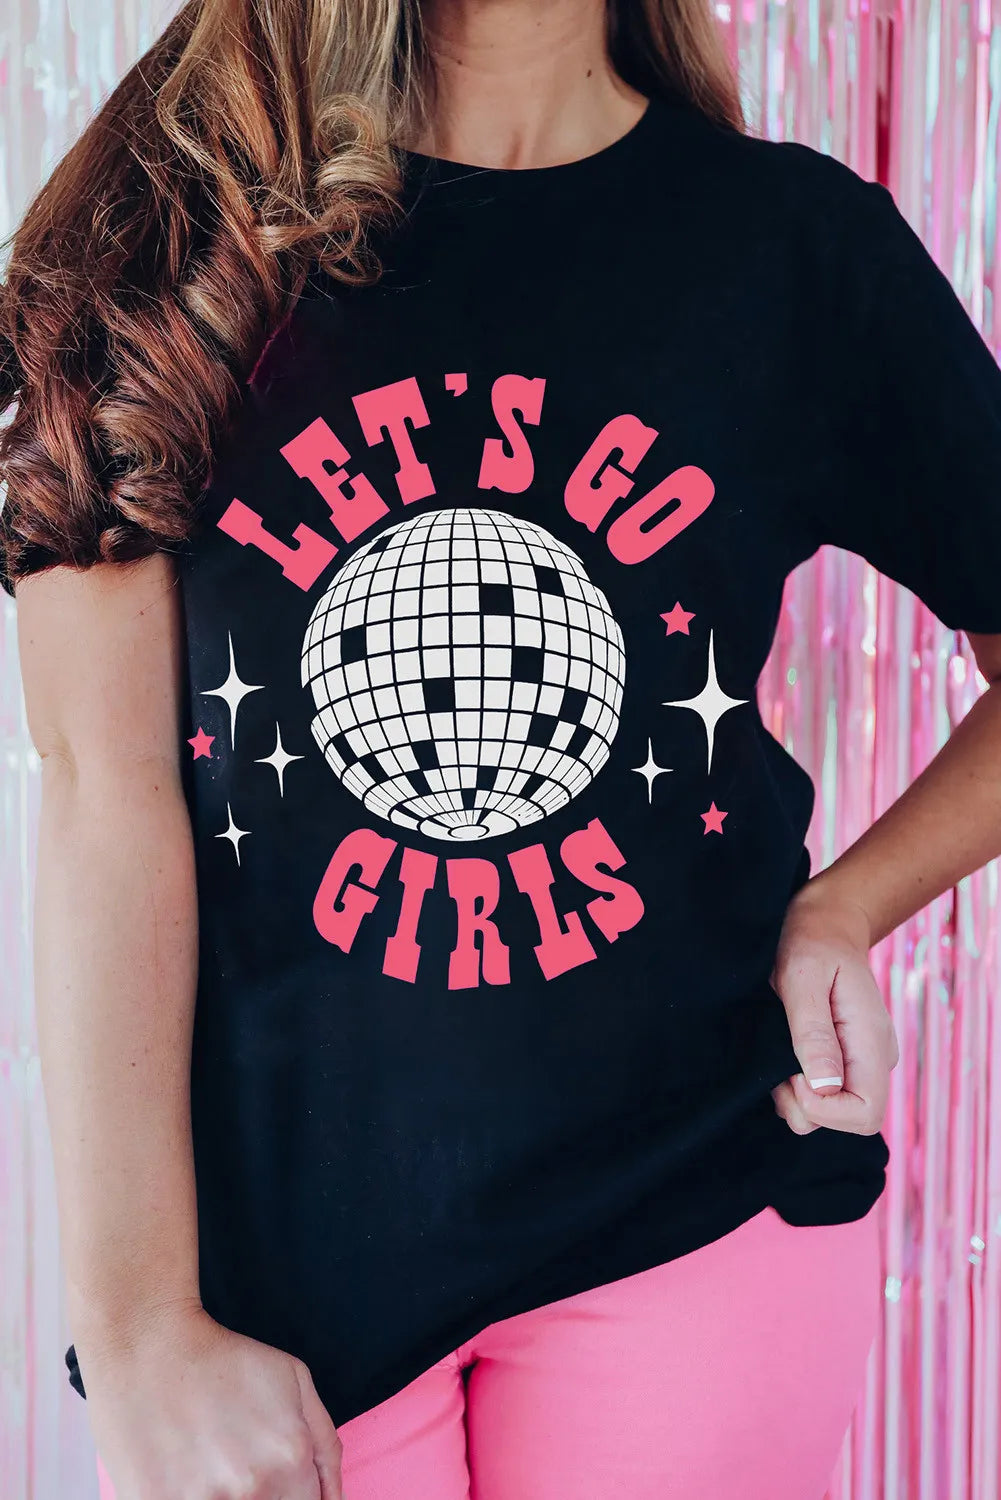 Let's go girls graphic tee